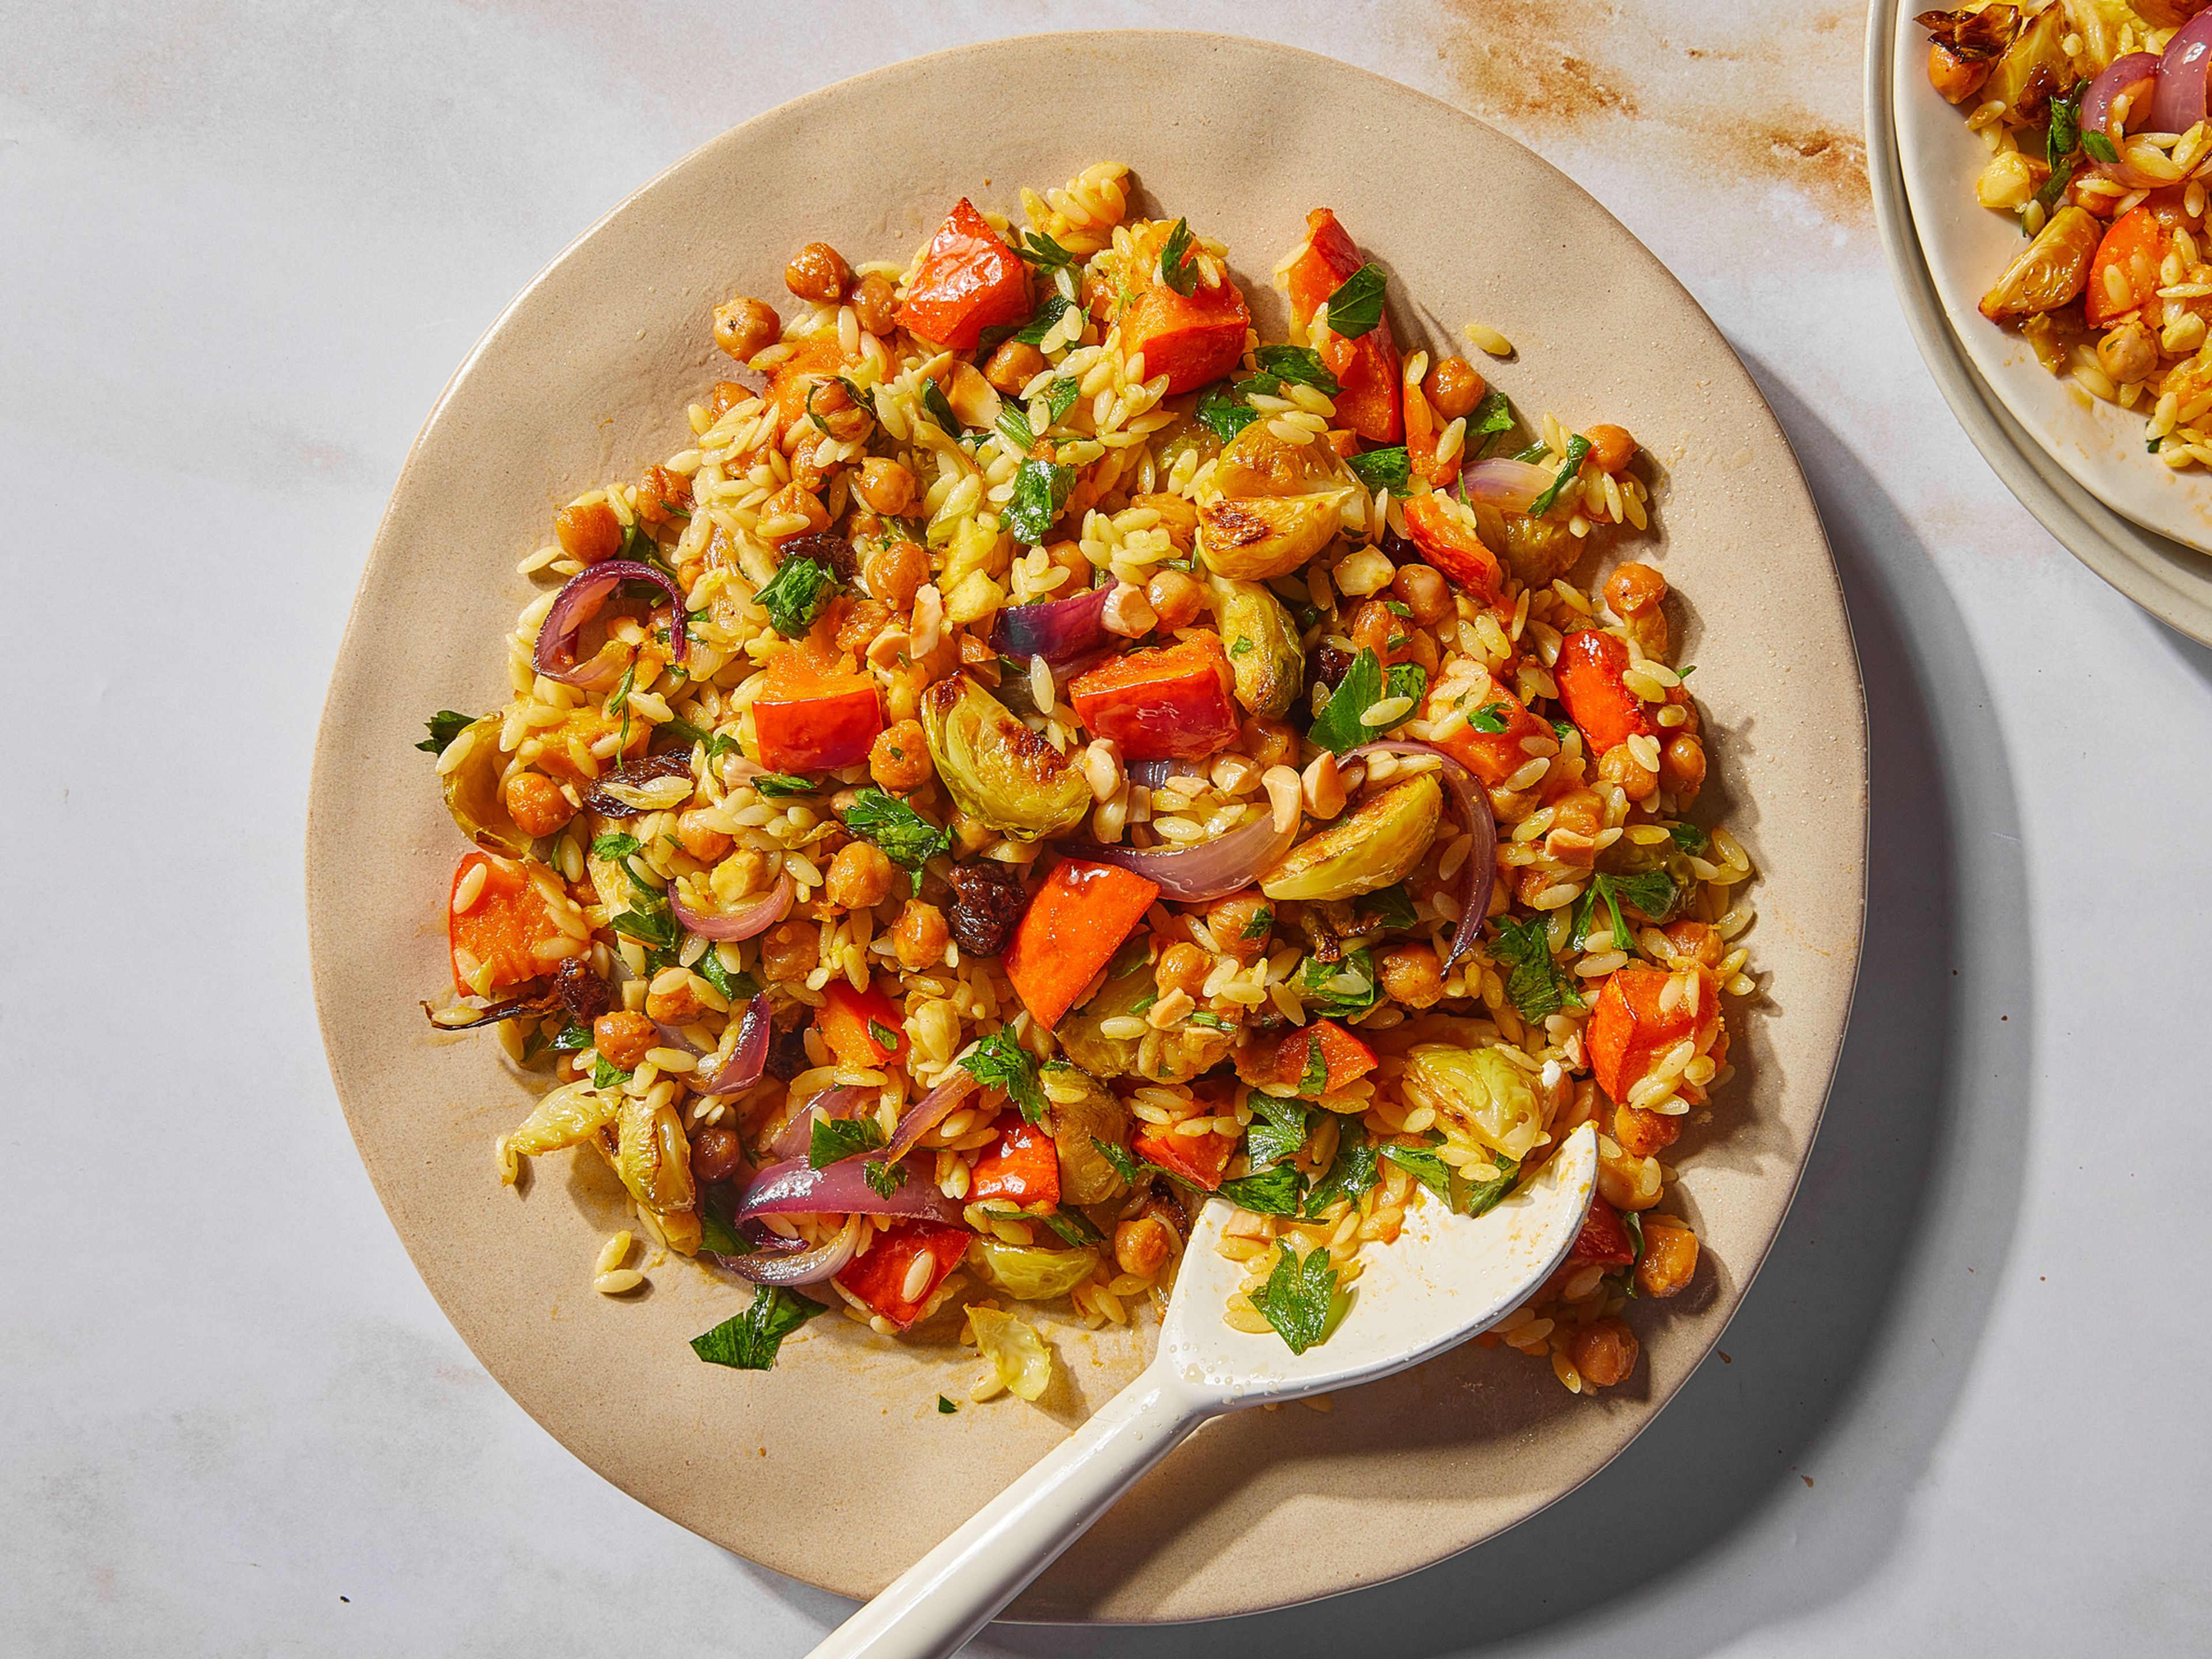 Orzo salad with harissa-roasted pumpkin and Brussels sprouts